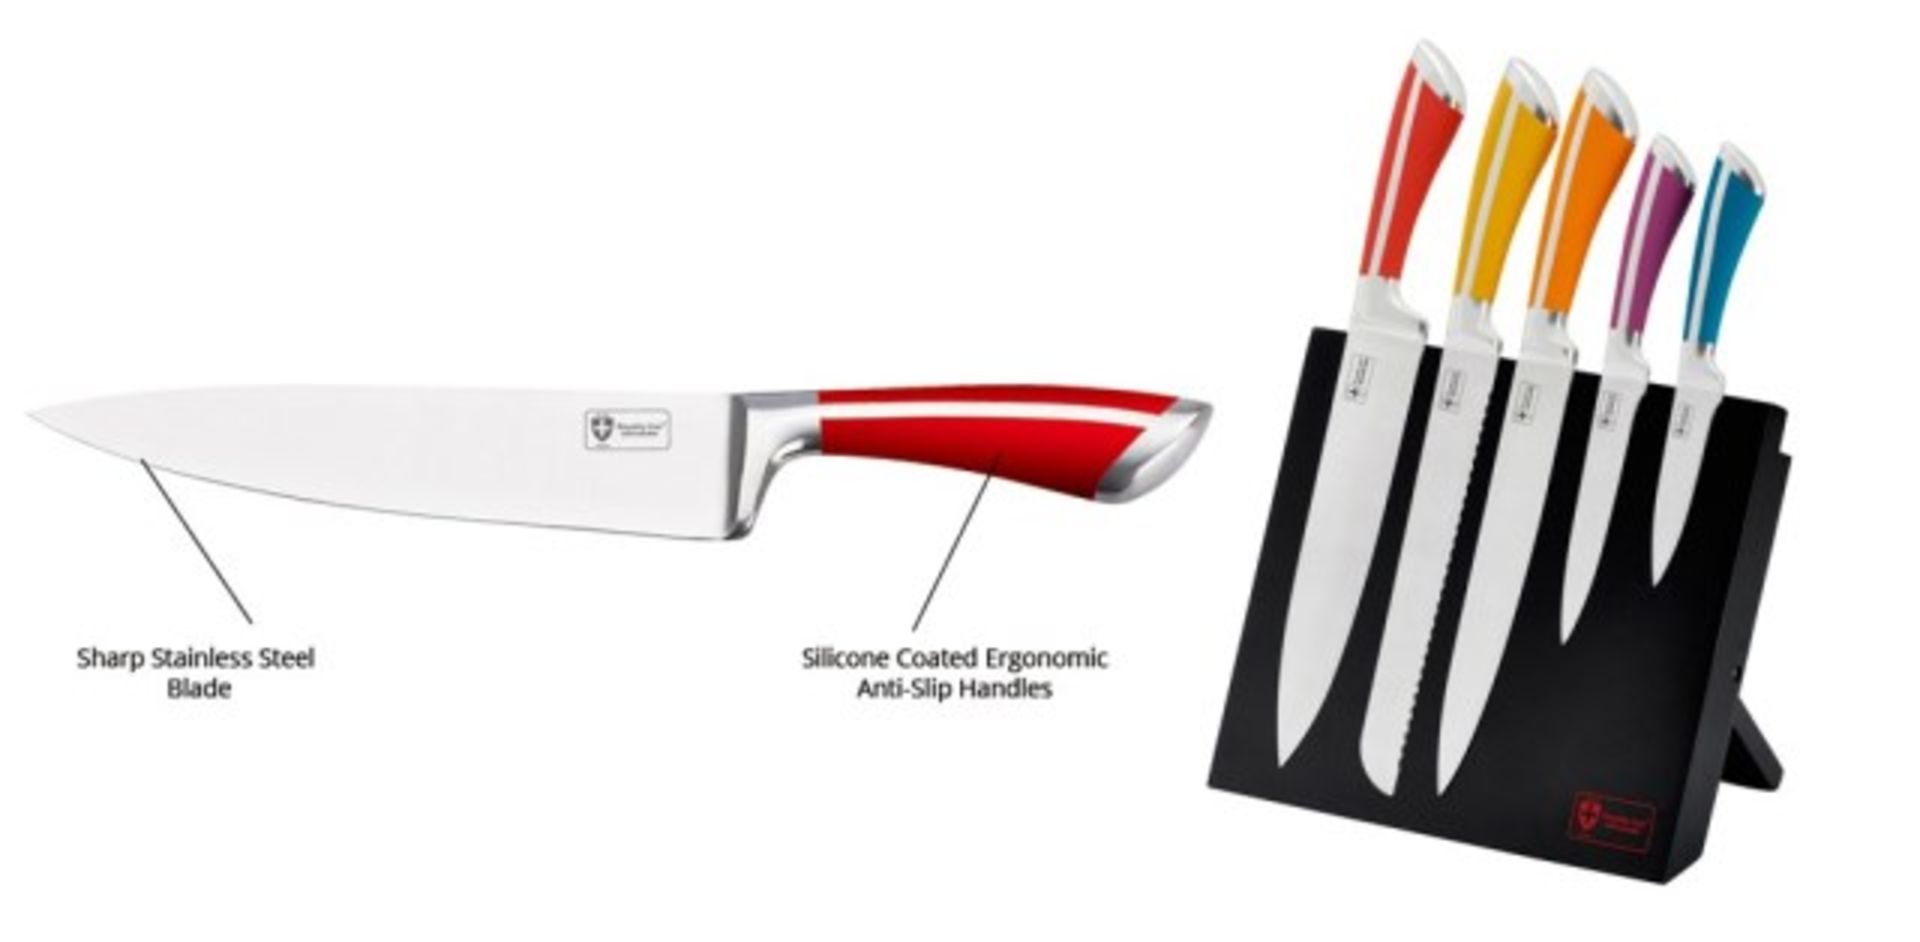 V *TRADE QTY* Brand New 5 Piece Swiss Knife Set With Folding Magnetic Stand RRP199 Euros X 24 YOUR